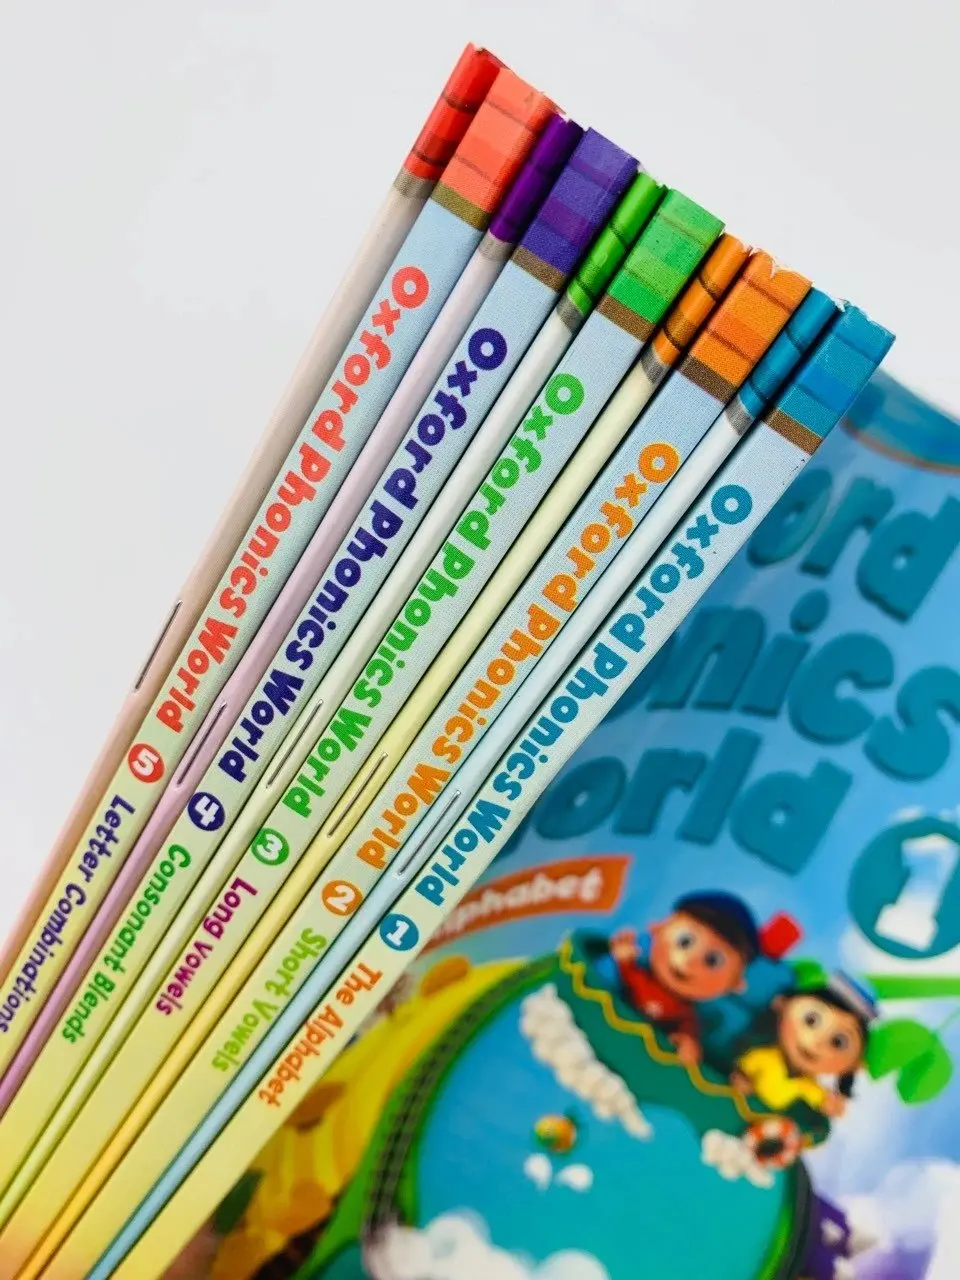 10 Books Of Set Oxford Phonics World Storybook Children Learning English Case Early Learning Books Workbook Educational Book enlarge